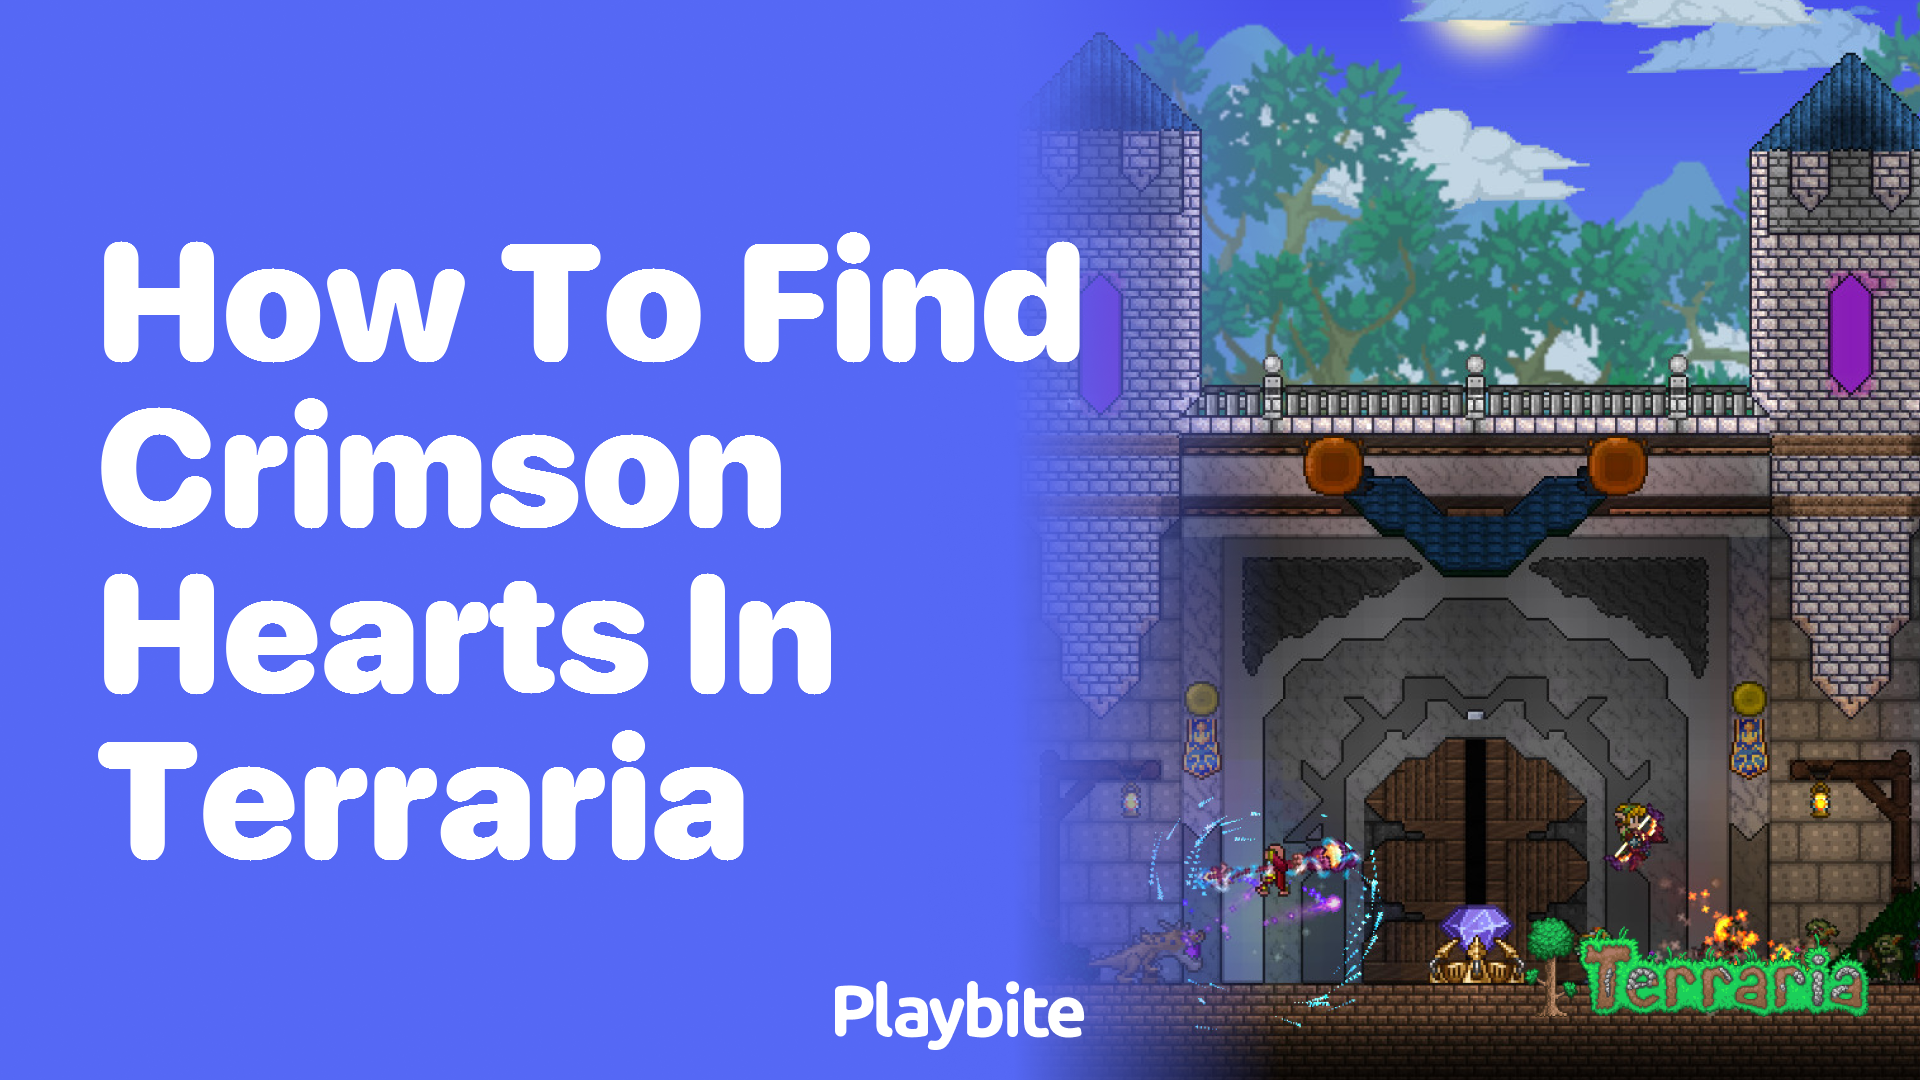 How to find Crimson Hearts in Terraria